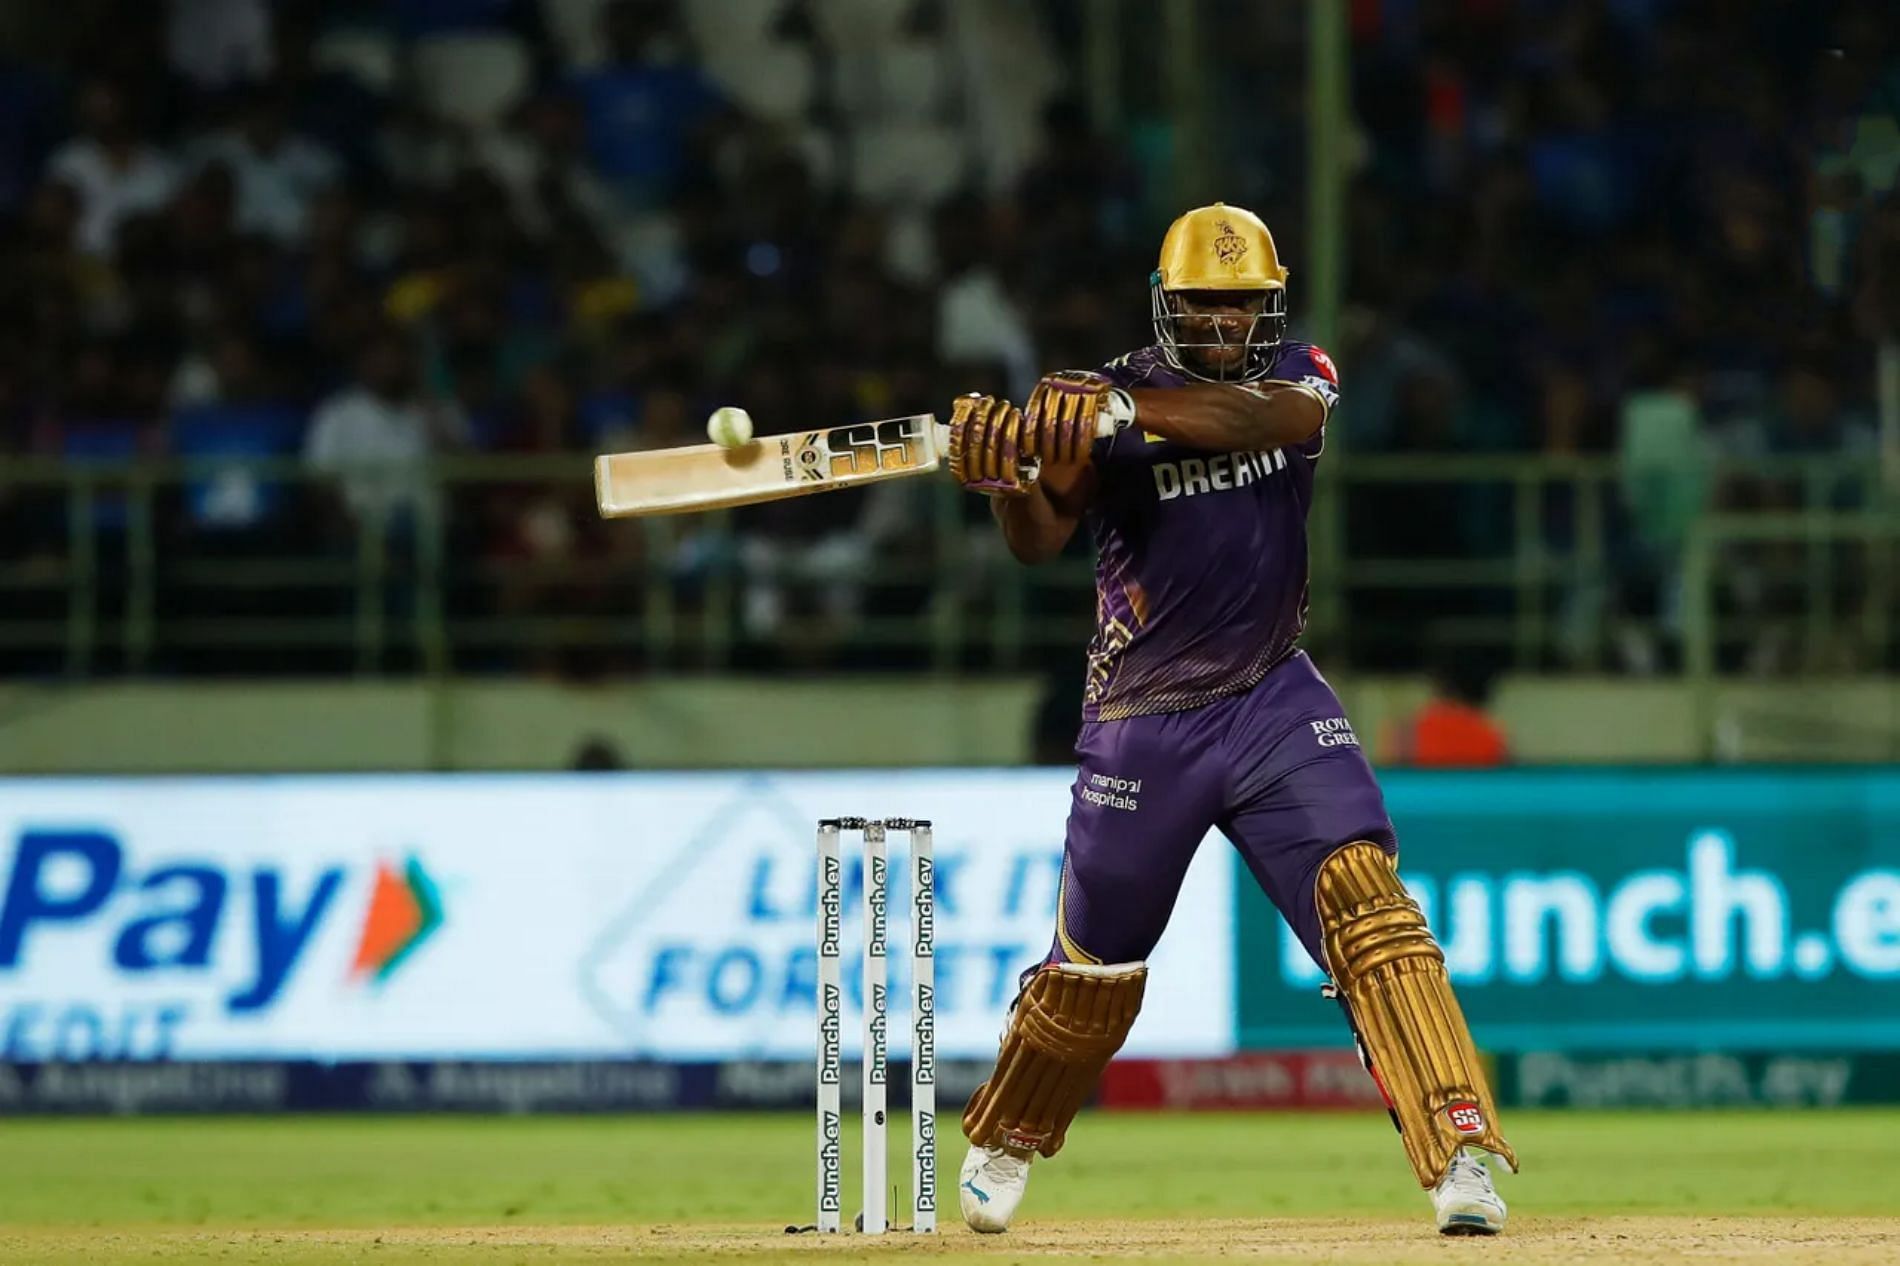 KKR all-rounder Andre Russell has been in magnificent form. (Pic: BCCI/ iplt20.com)